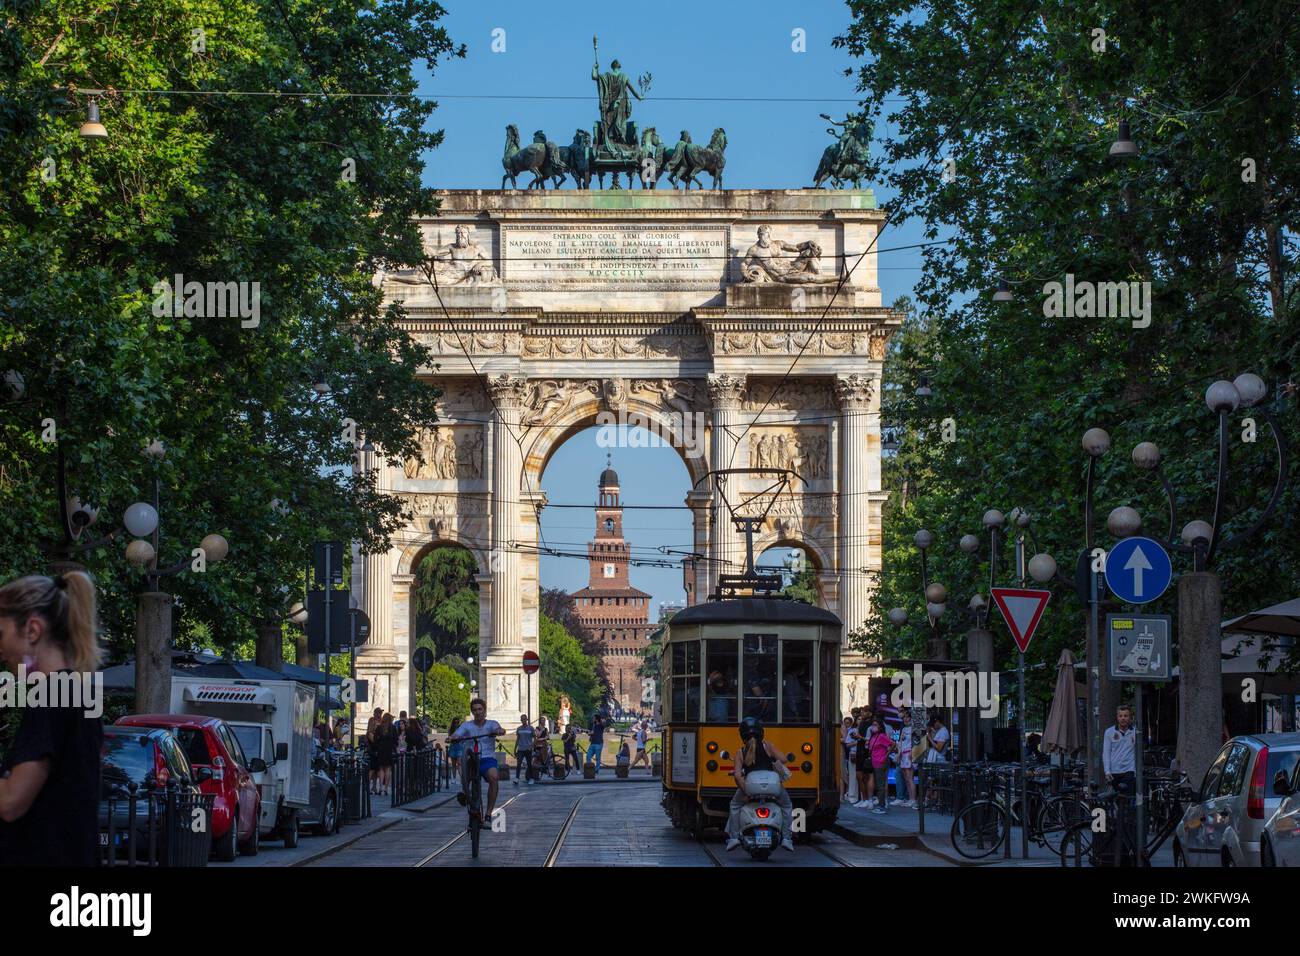 Arco della Pace, Peace Arch, in Piazza Sempione of Milan. It is one of the landmarks of the city. Stock Photo